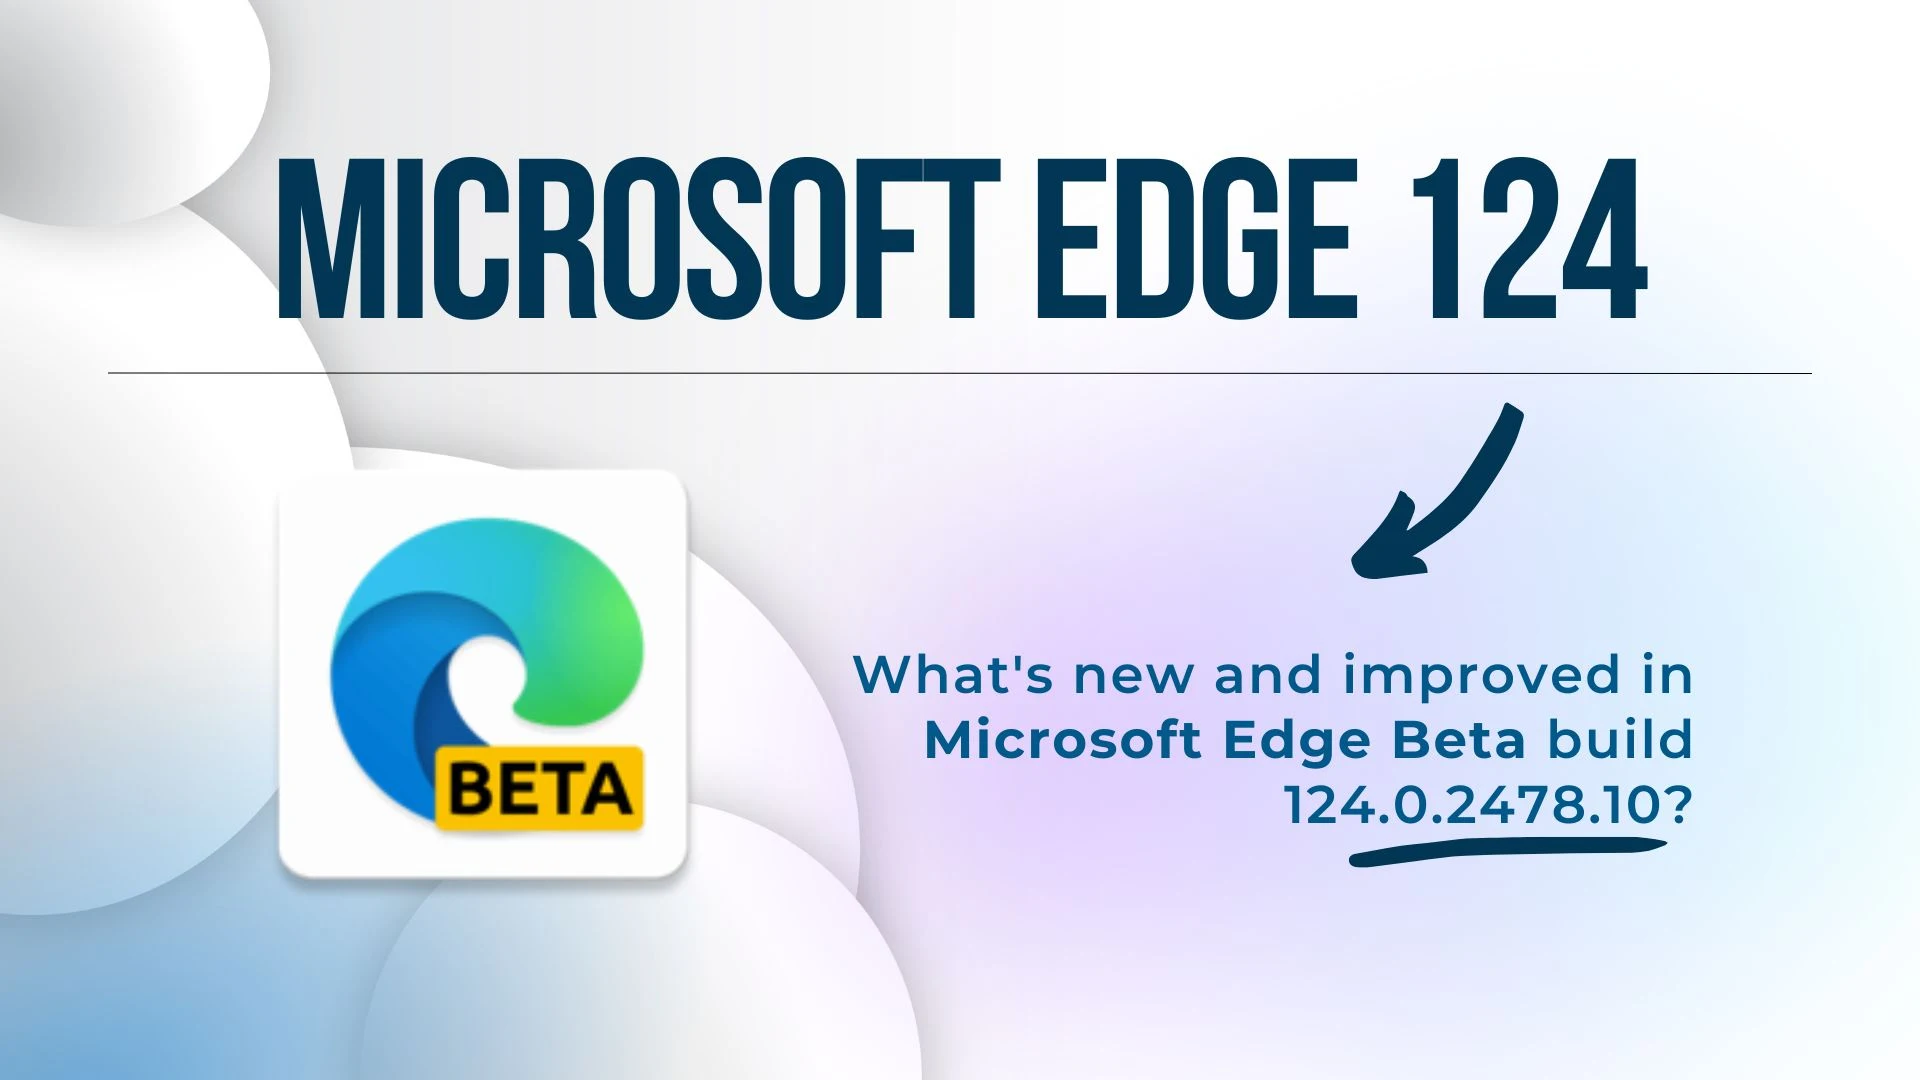 What's new and improved in Microsoft Edge Beta 124